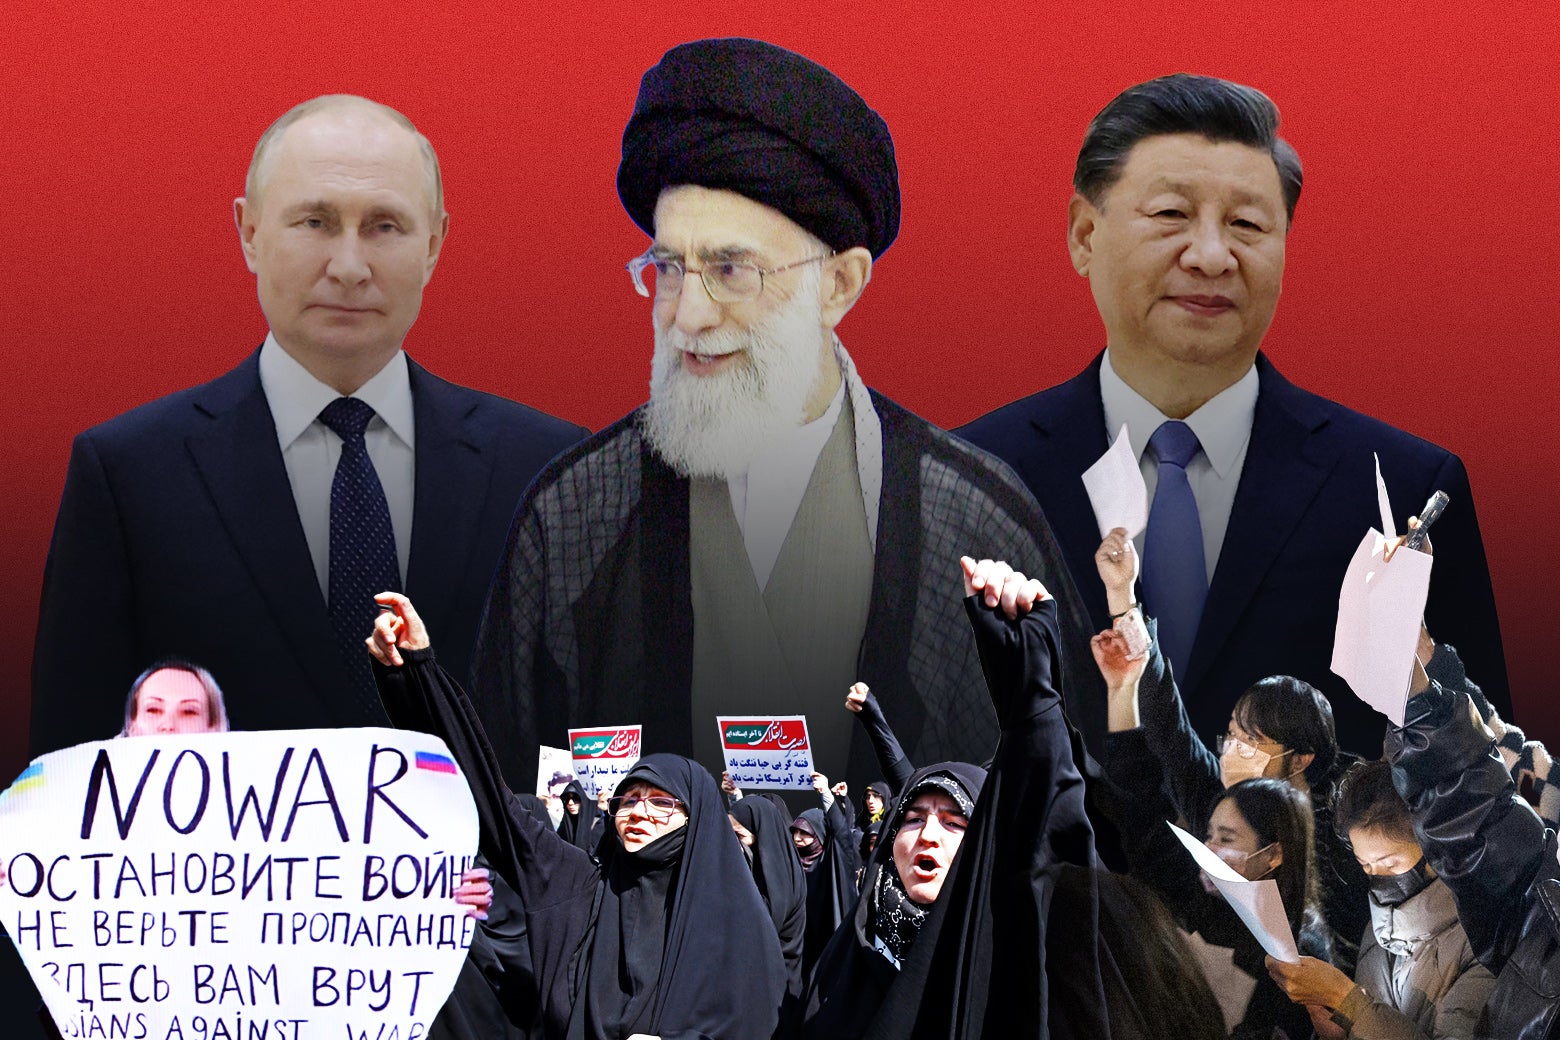 How Russia, Iran and China are susceptible to revolution.